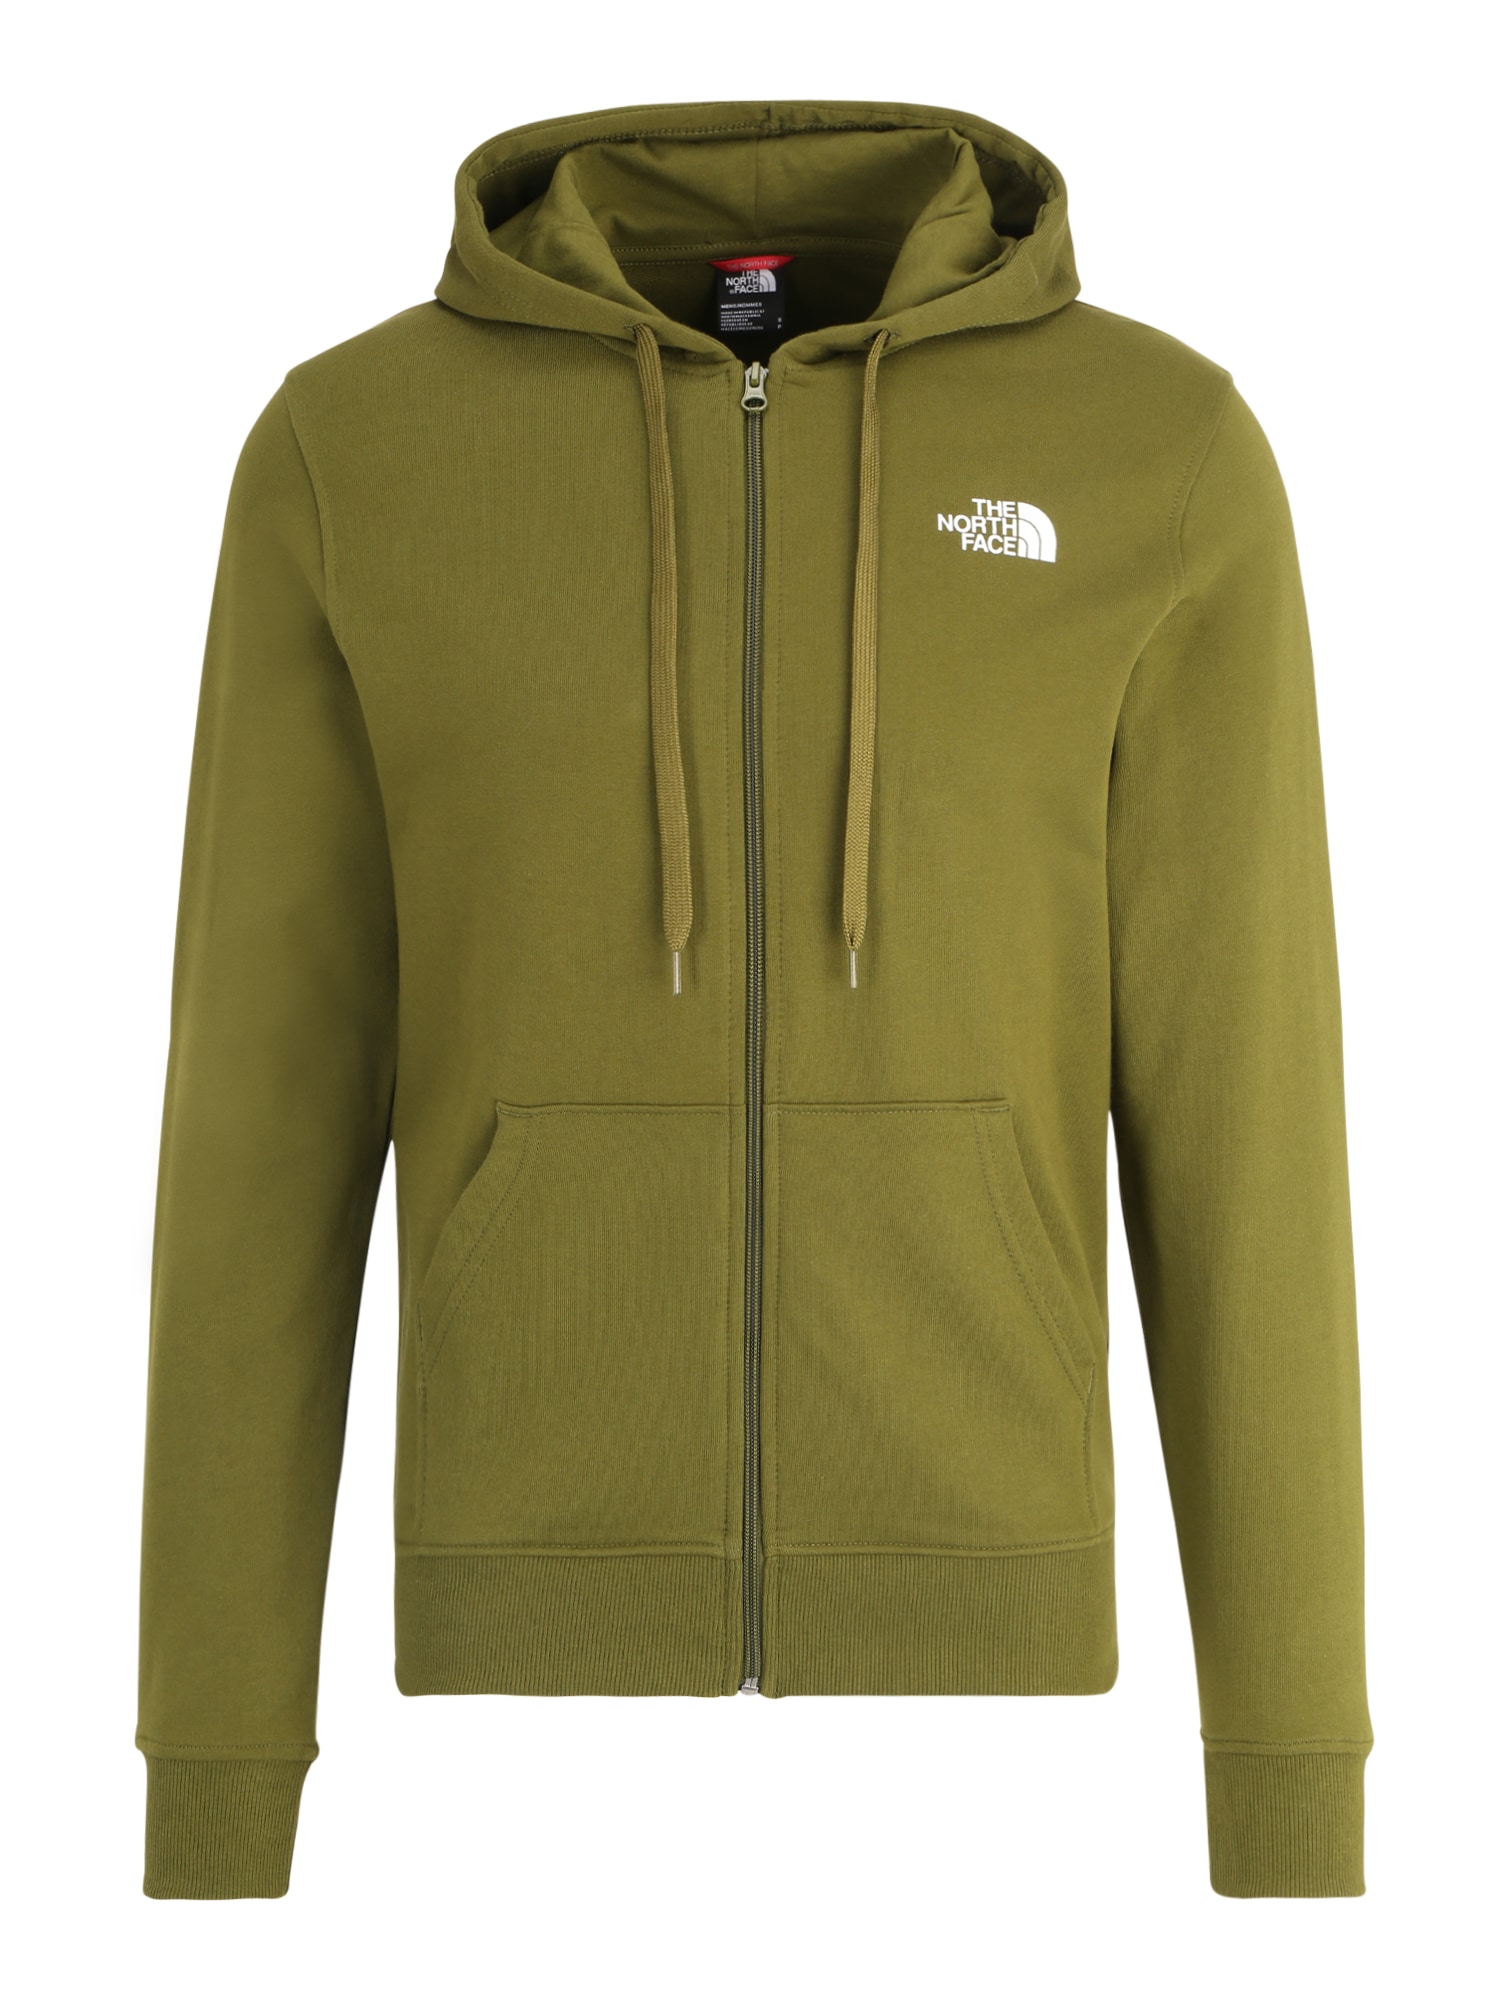 THE NORTH FACE Hanorac 'Open Gate'  oliv / alb